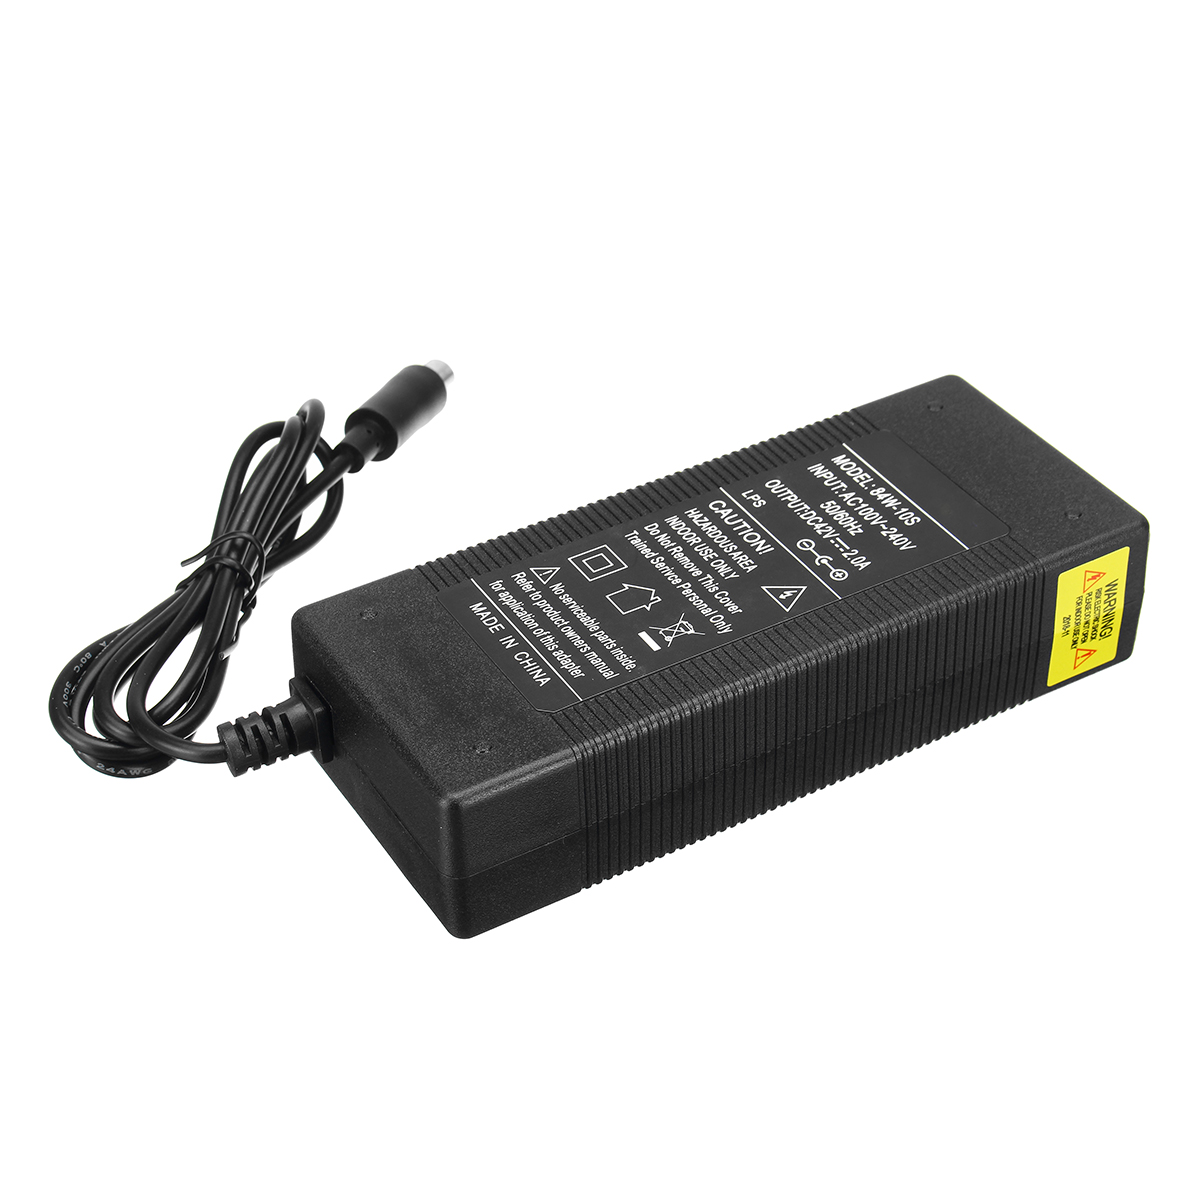 DC42V-17A-Lithium-Battery-Charger-Battery-Equipment-for-Scooter-For-Ninebot-Scooter-1417293-7